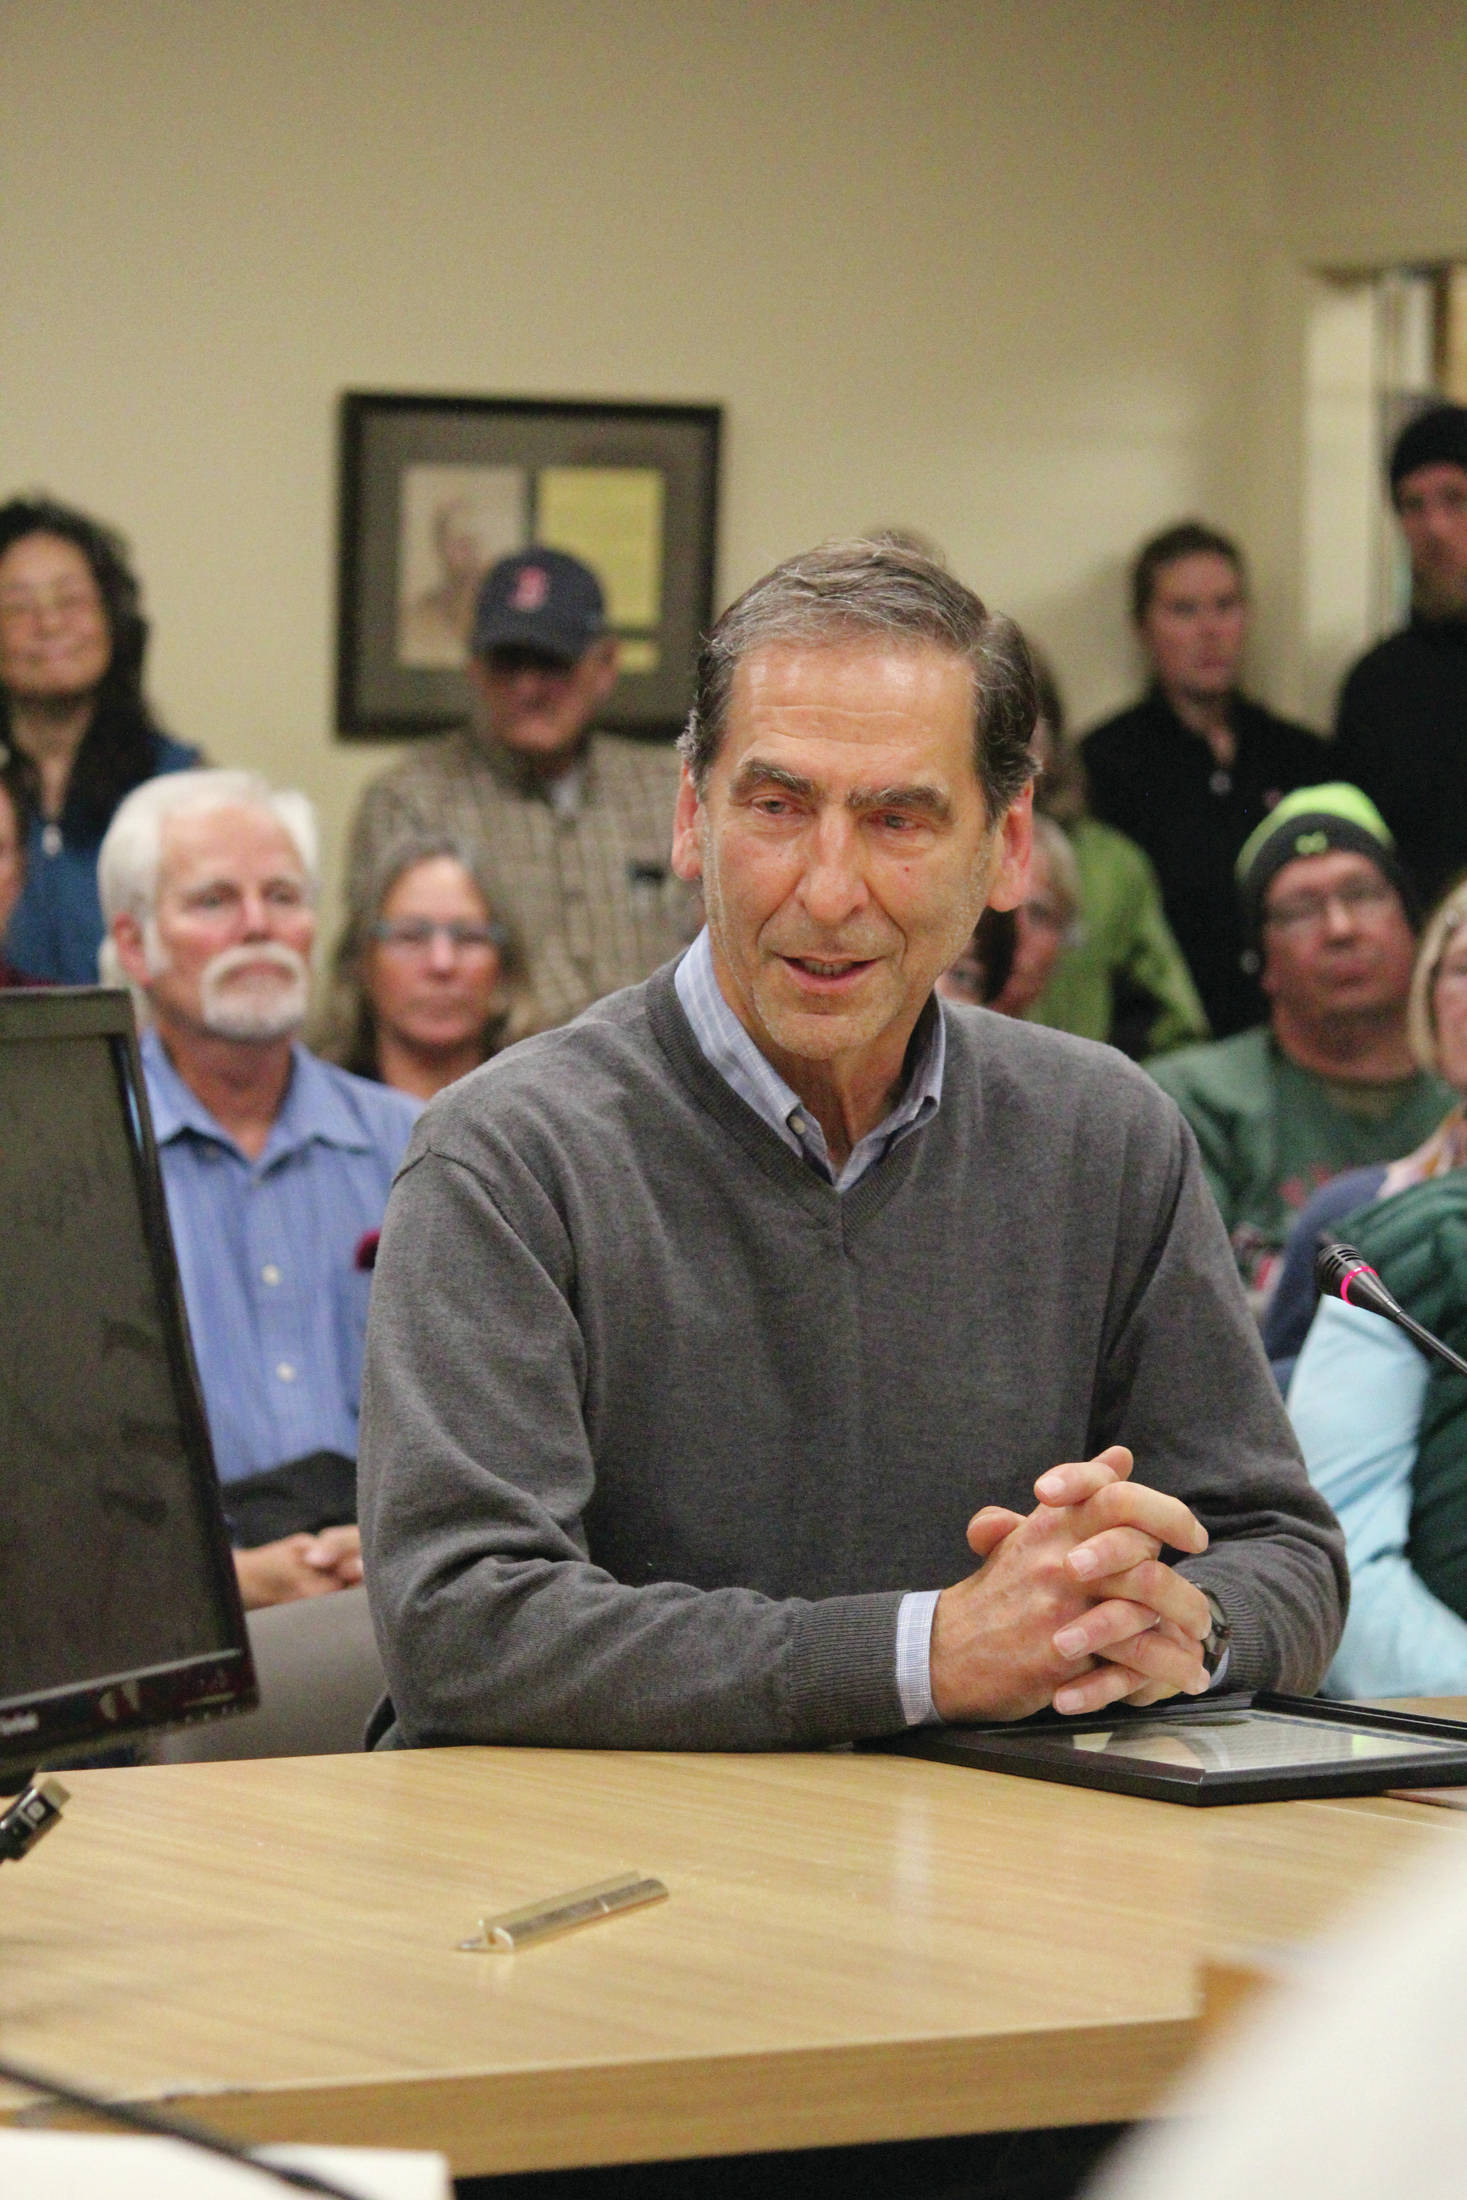 Loren Leman, former Lt. Governor of Alaska who grew up in Ninilchik, speaks after being presented with a proclamation at a Tuesday, Sept. 17, 2019 Kenai Peninsula Borough Assembly meeting at Homer City Hall in Homer, Alaska. (Photo by Megan Pacer/Homer News)